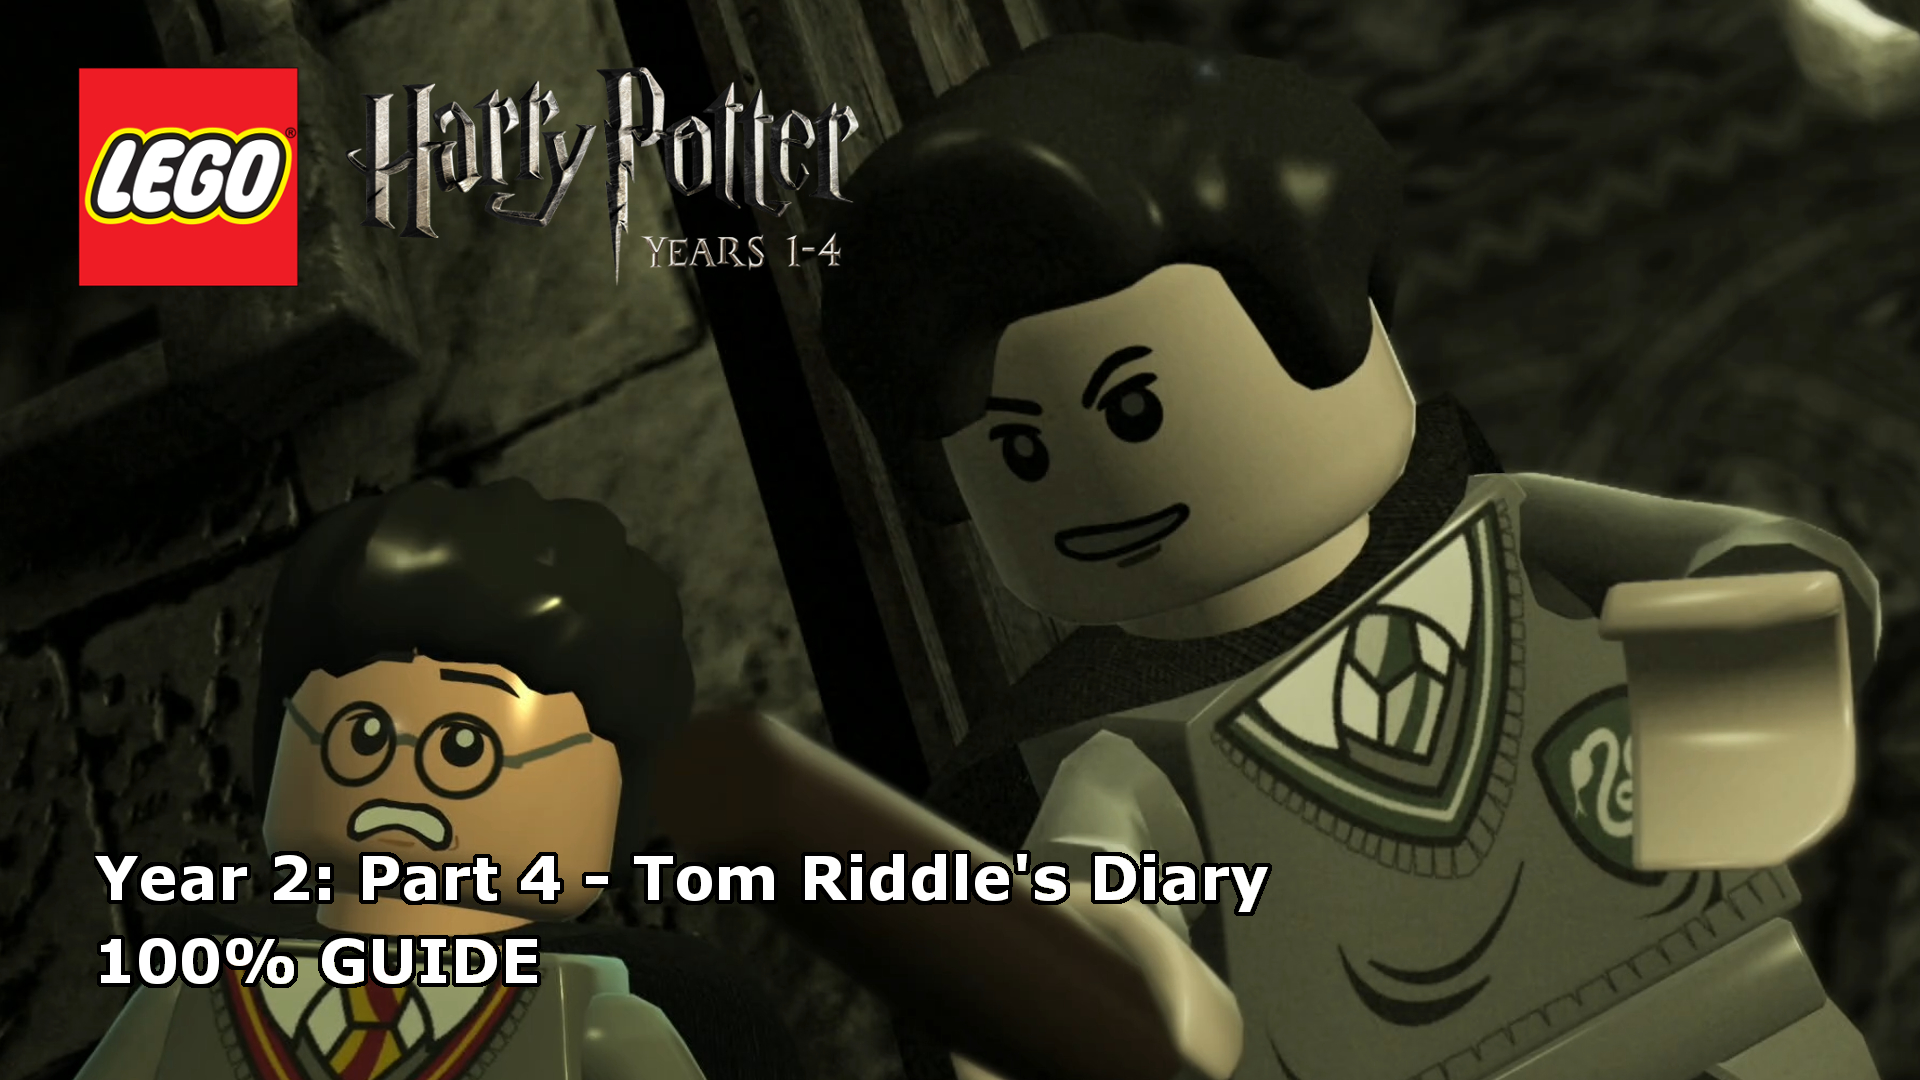 lego-harry-potter-years-1-4-tom-riddle-s-diary-100-guide